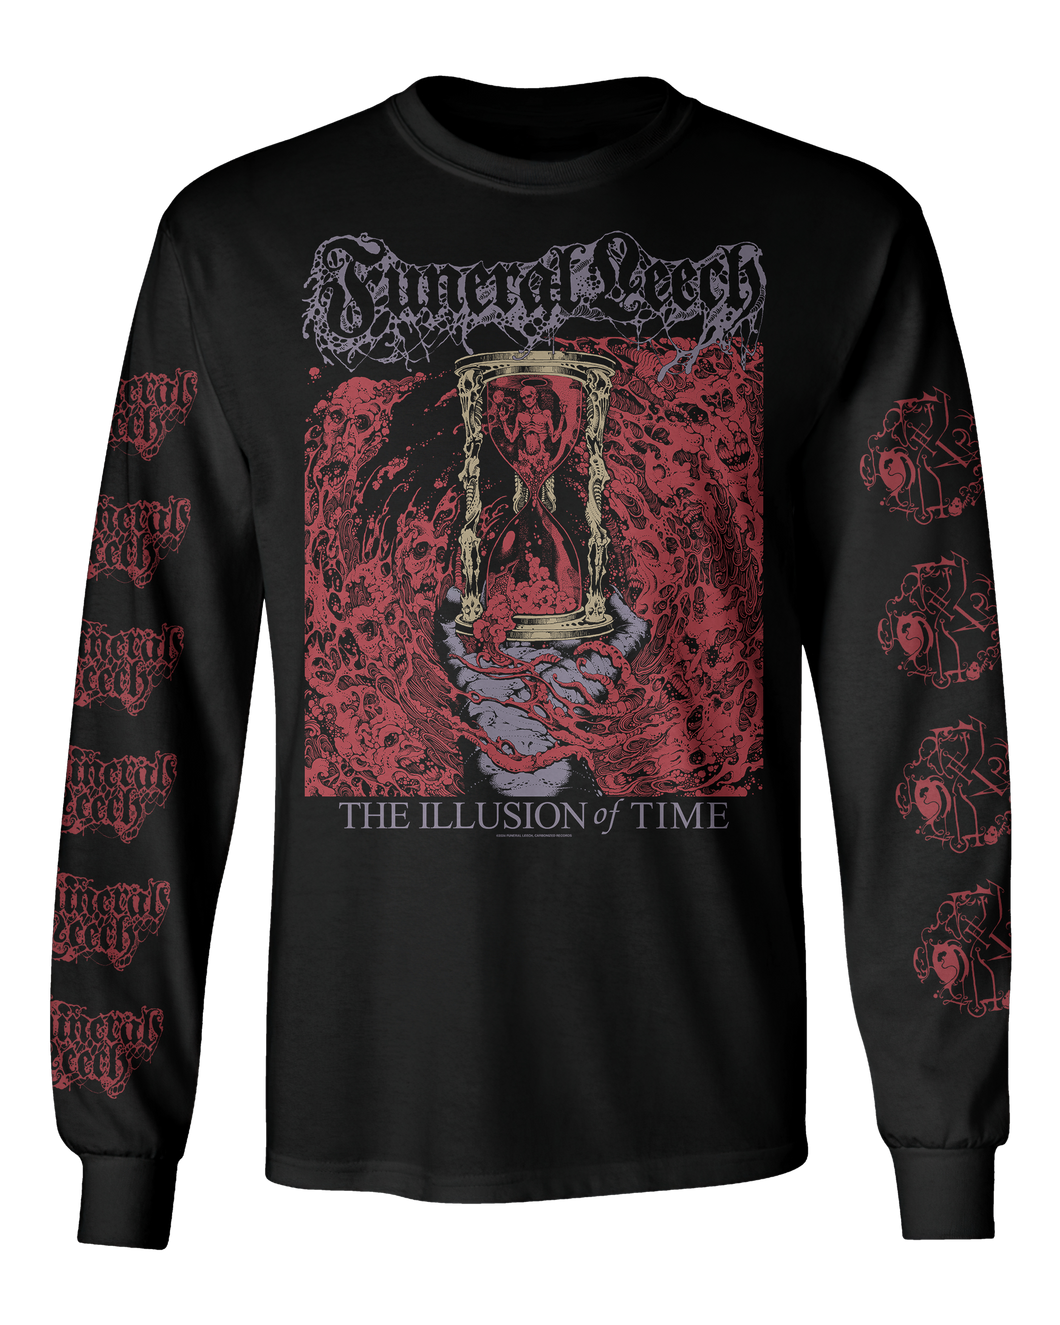 Funeral Leech - “The Illusion of Time” Long Sleeve T-Shirt